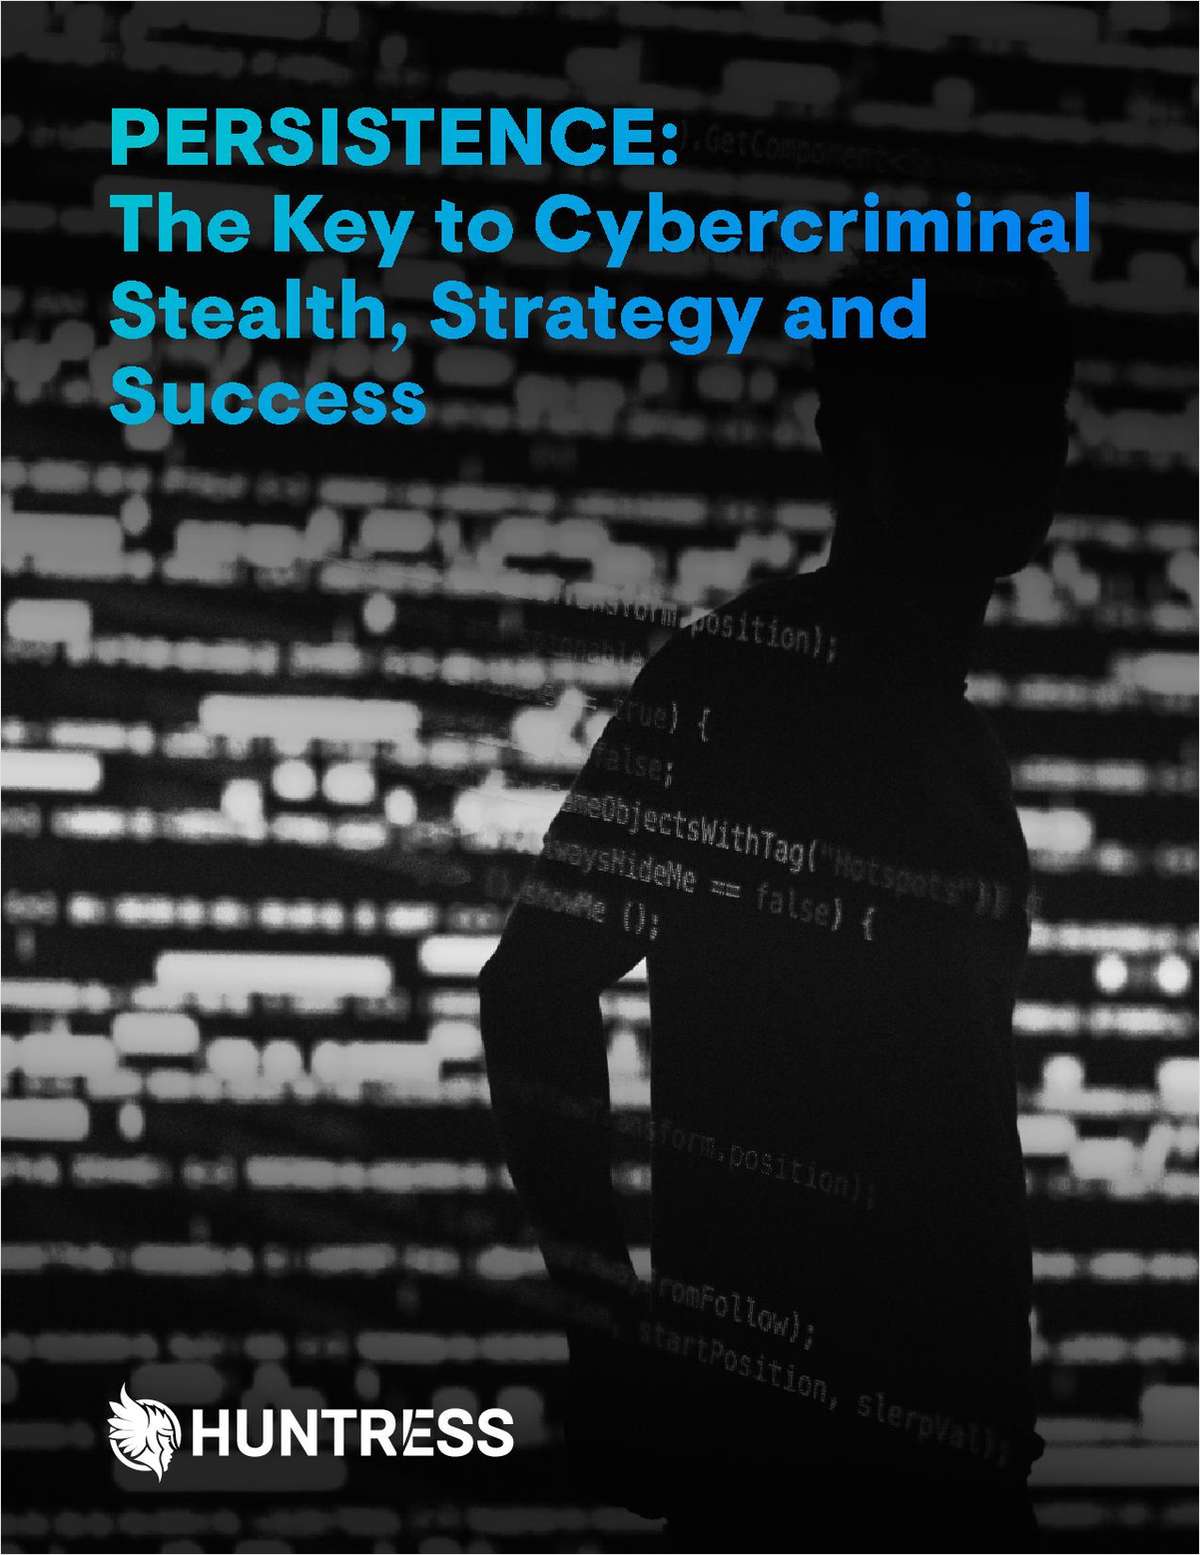 PERSISTENCE: The Key to Cybercriminal Stealth, Strategy and Success